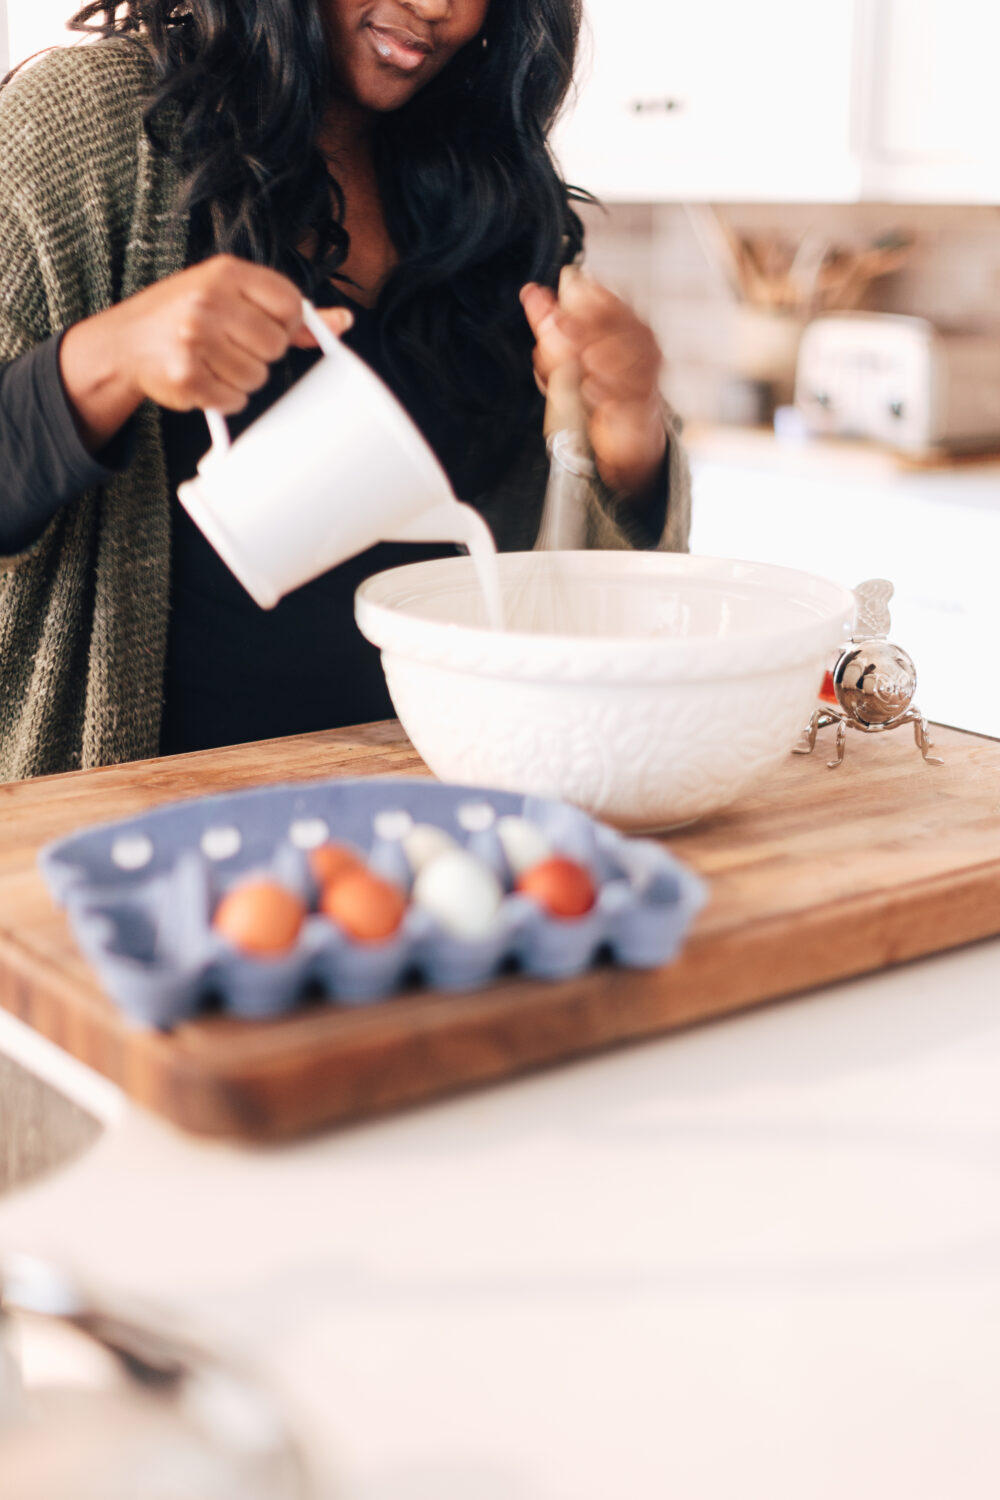 Make waffles with a white bowl. Woman pouring milk and other ingredients into a bowl.